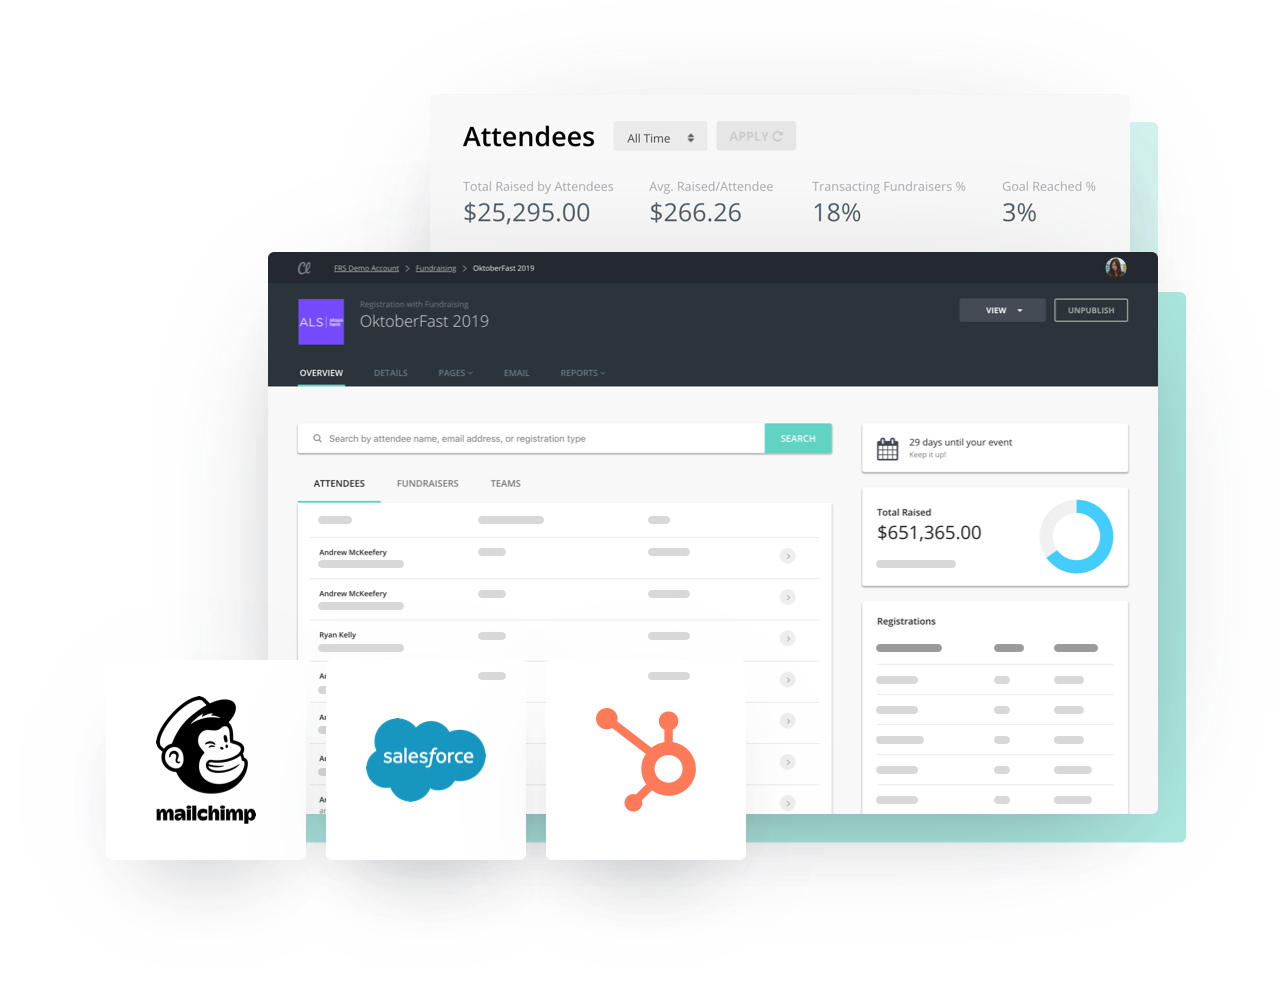 Examples of Classy's attendee and event management dashboards that integrate with MailChimp, Hubspot, and Salesforce